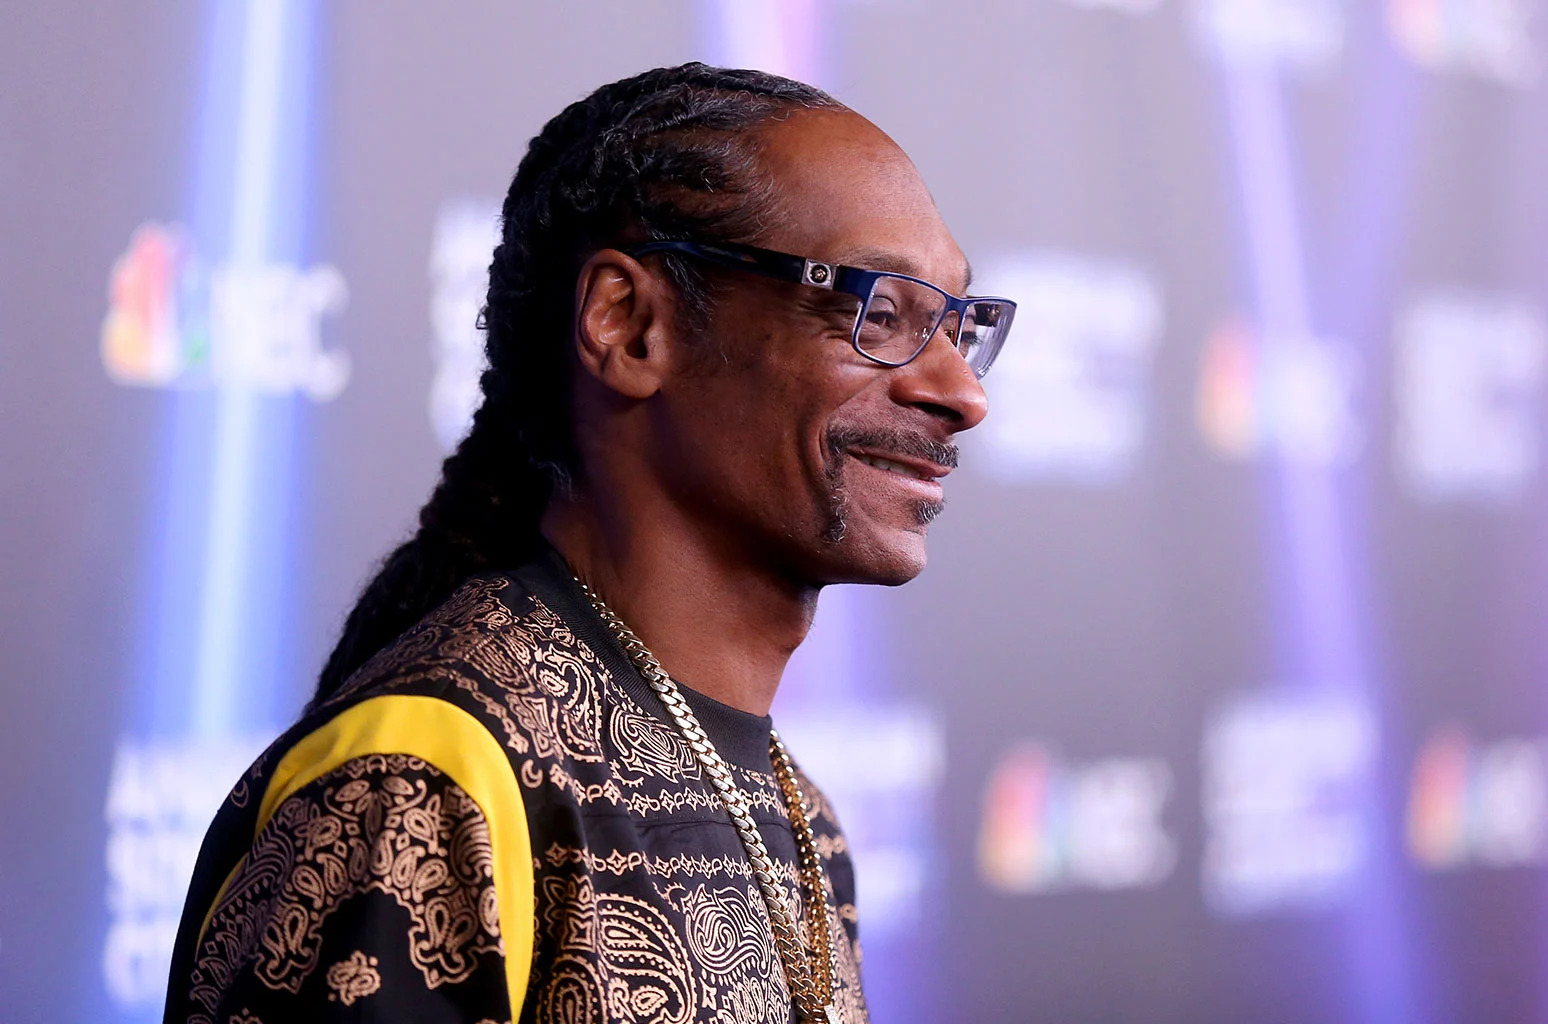 Snoop Dogg wearing a black printed shirt, gold chain necklace, and eyeglass